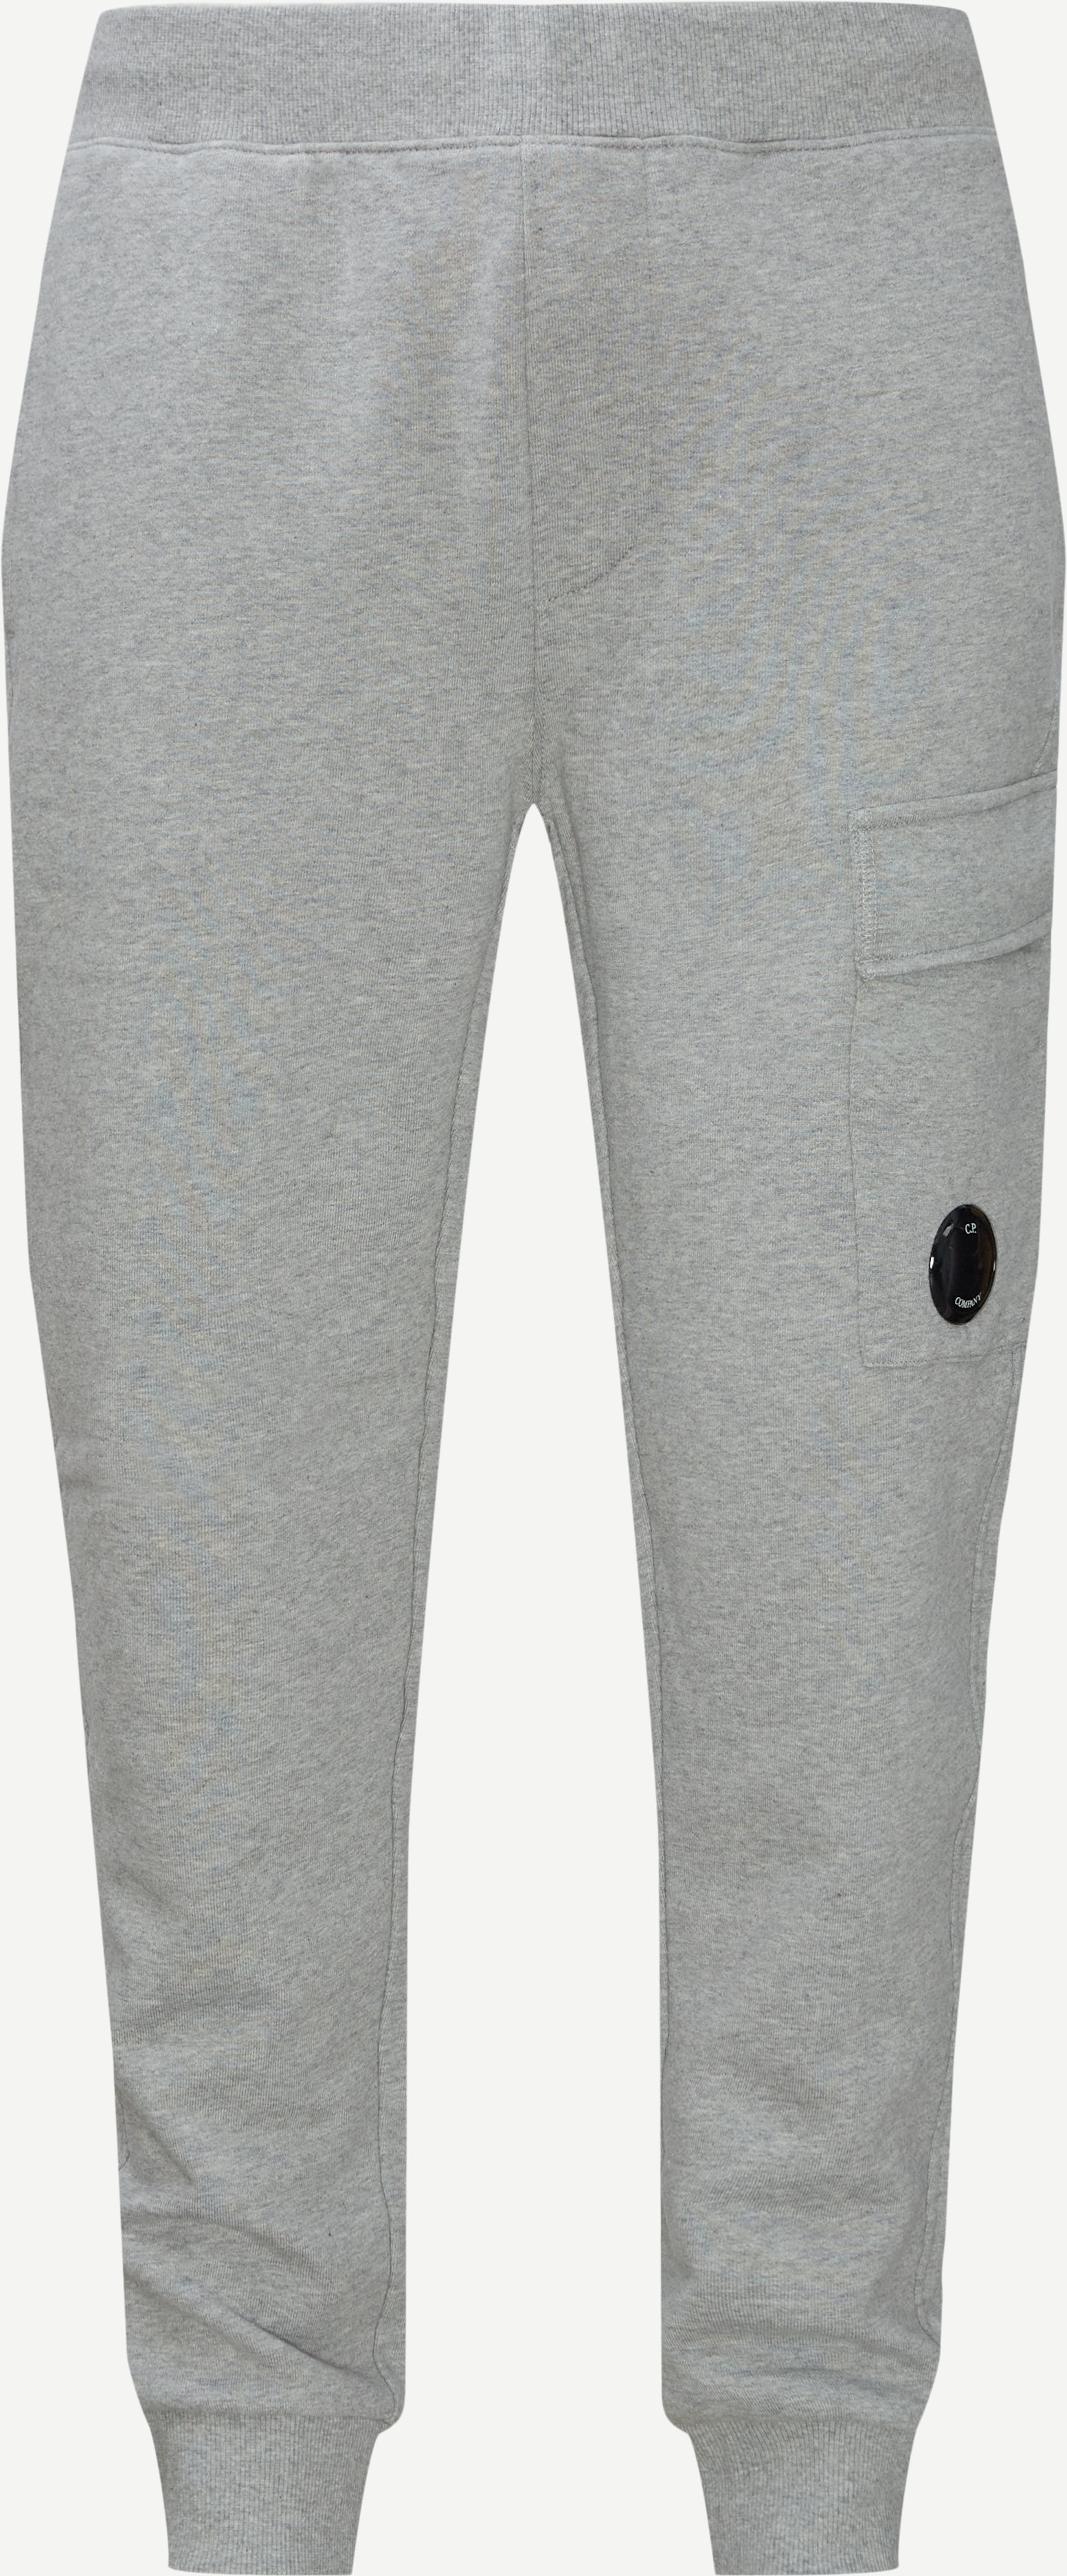 C.P. Company Trousers SP017A 5086W 2203 Grey